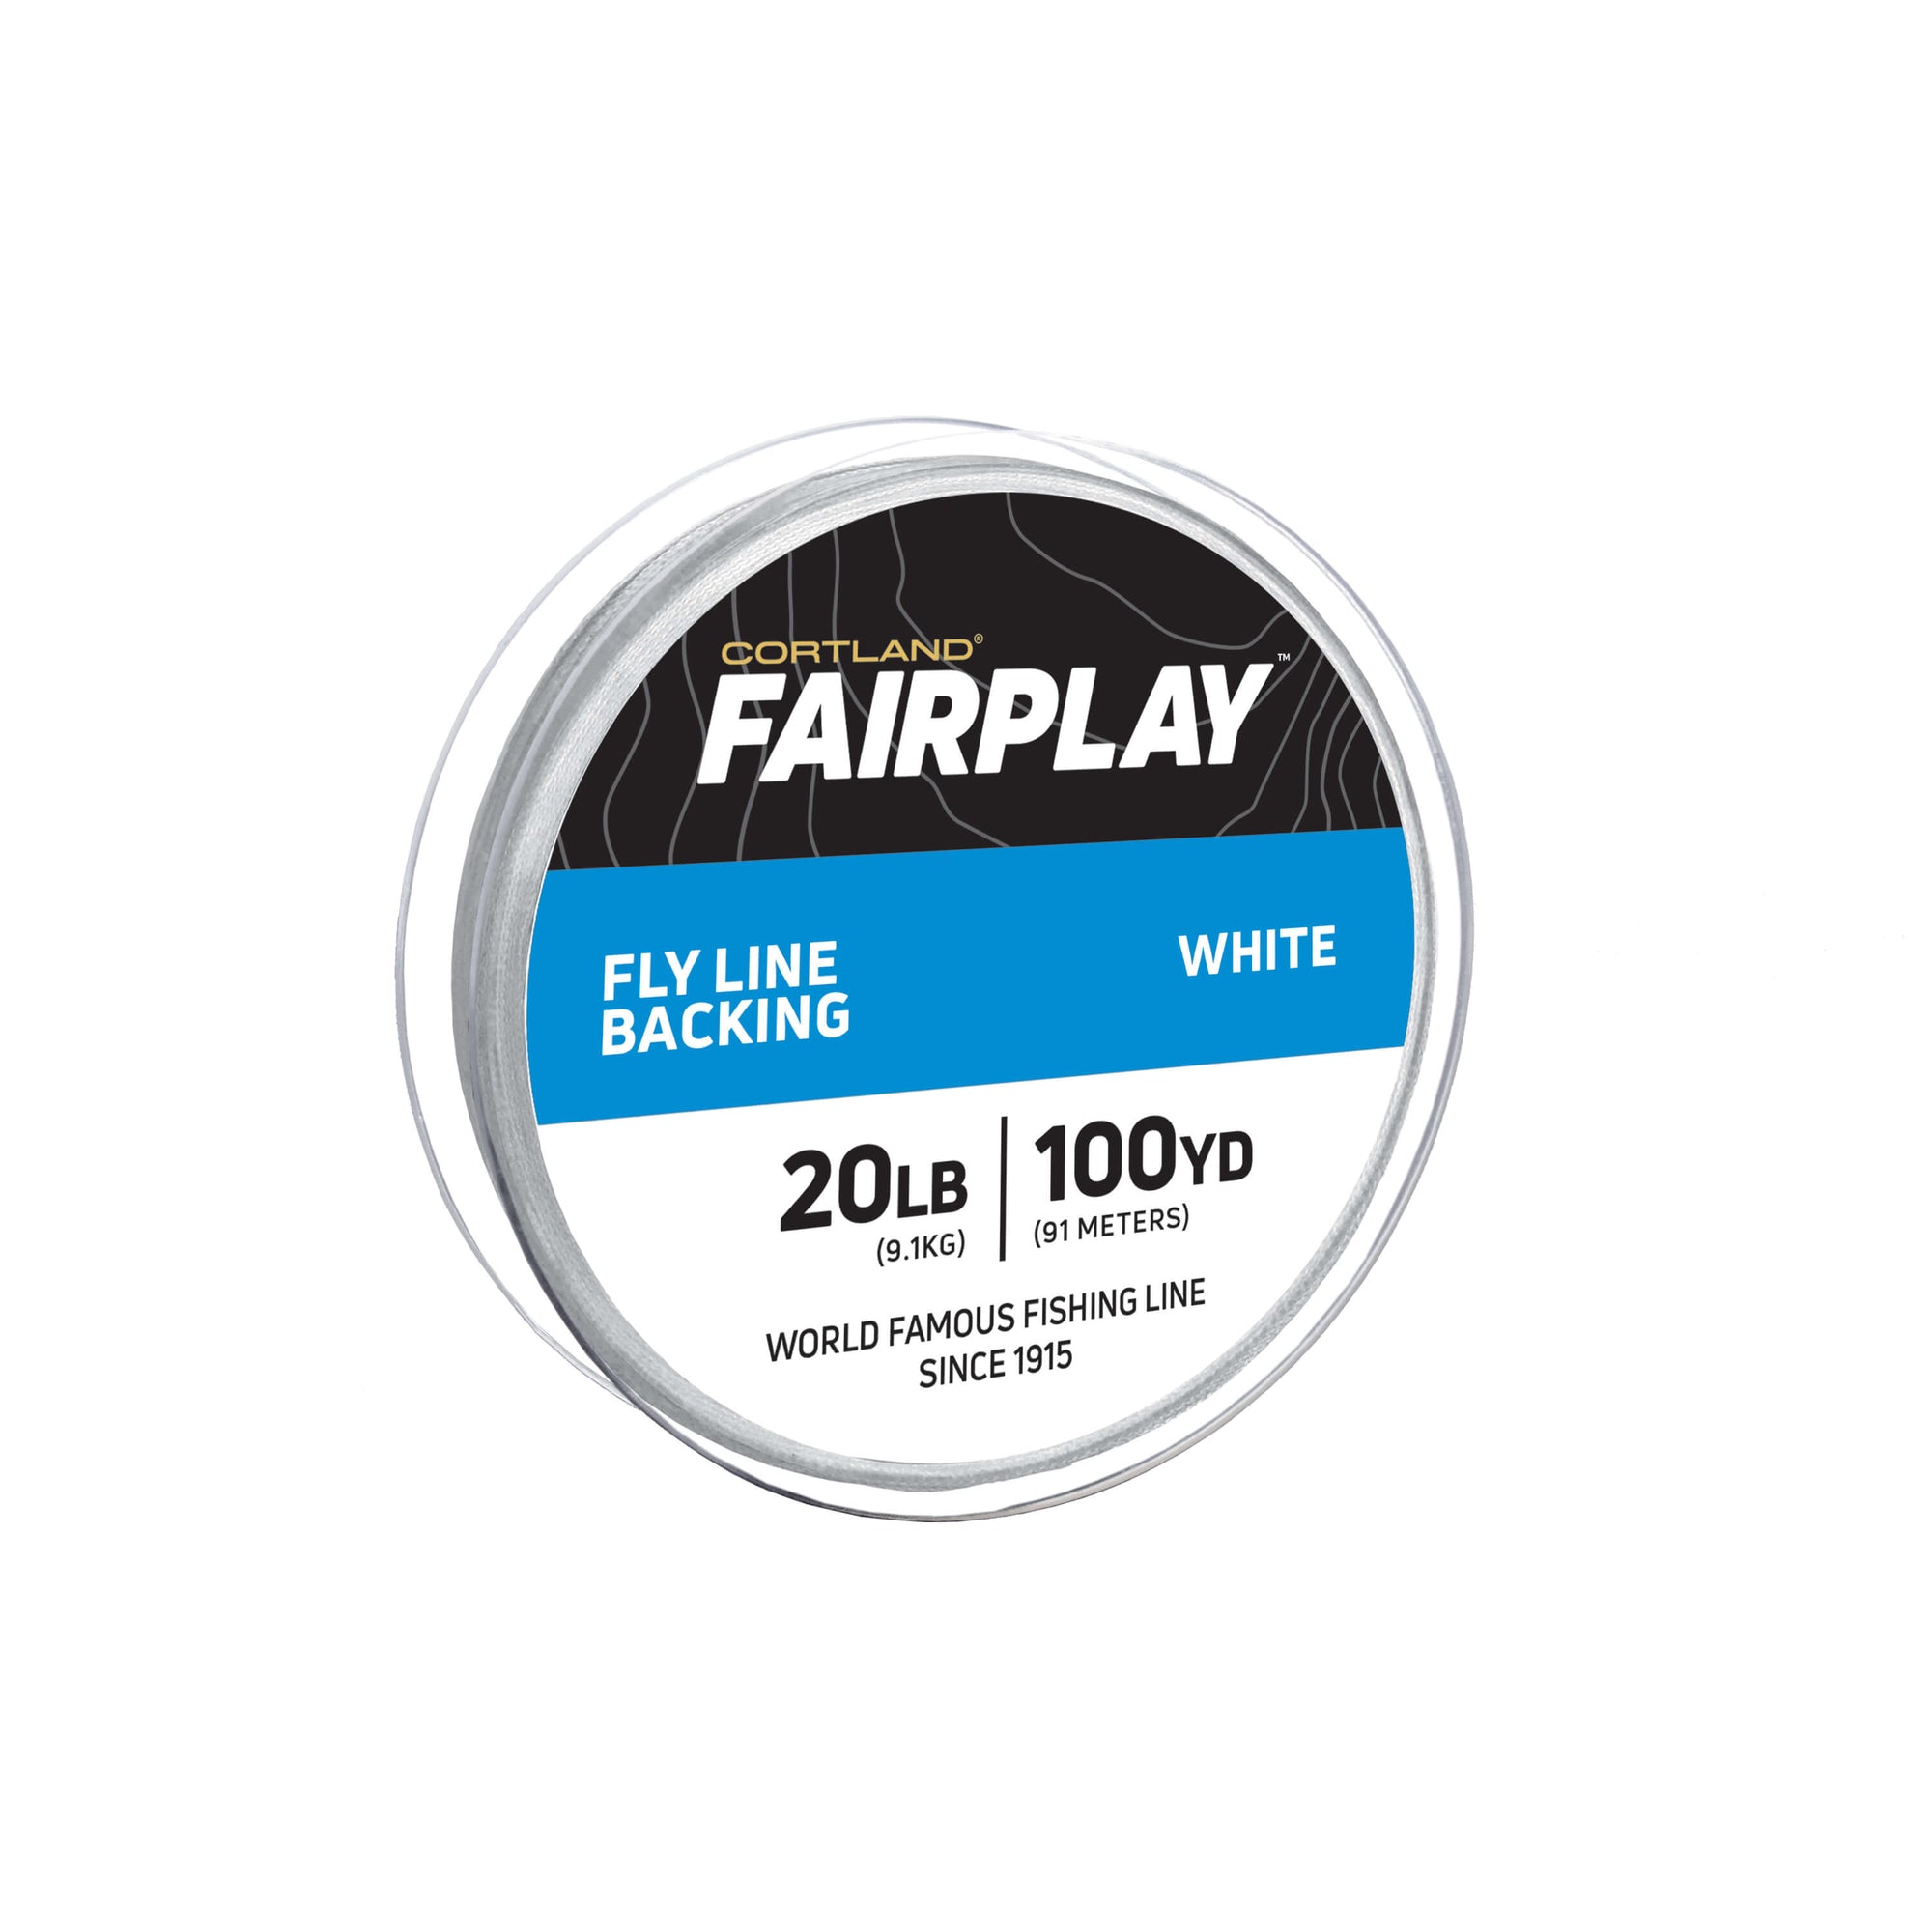 Fairplay Fly Line Backing - White